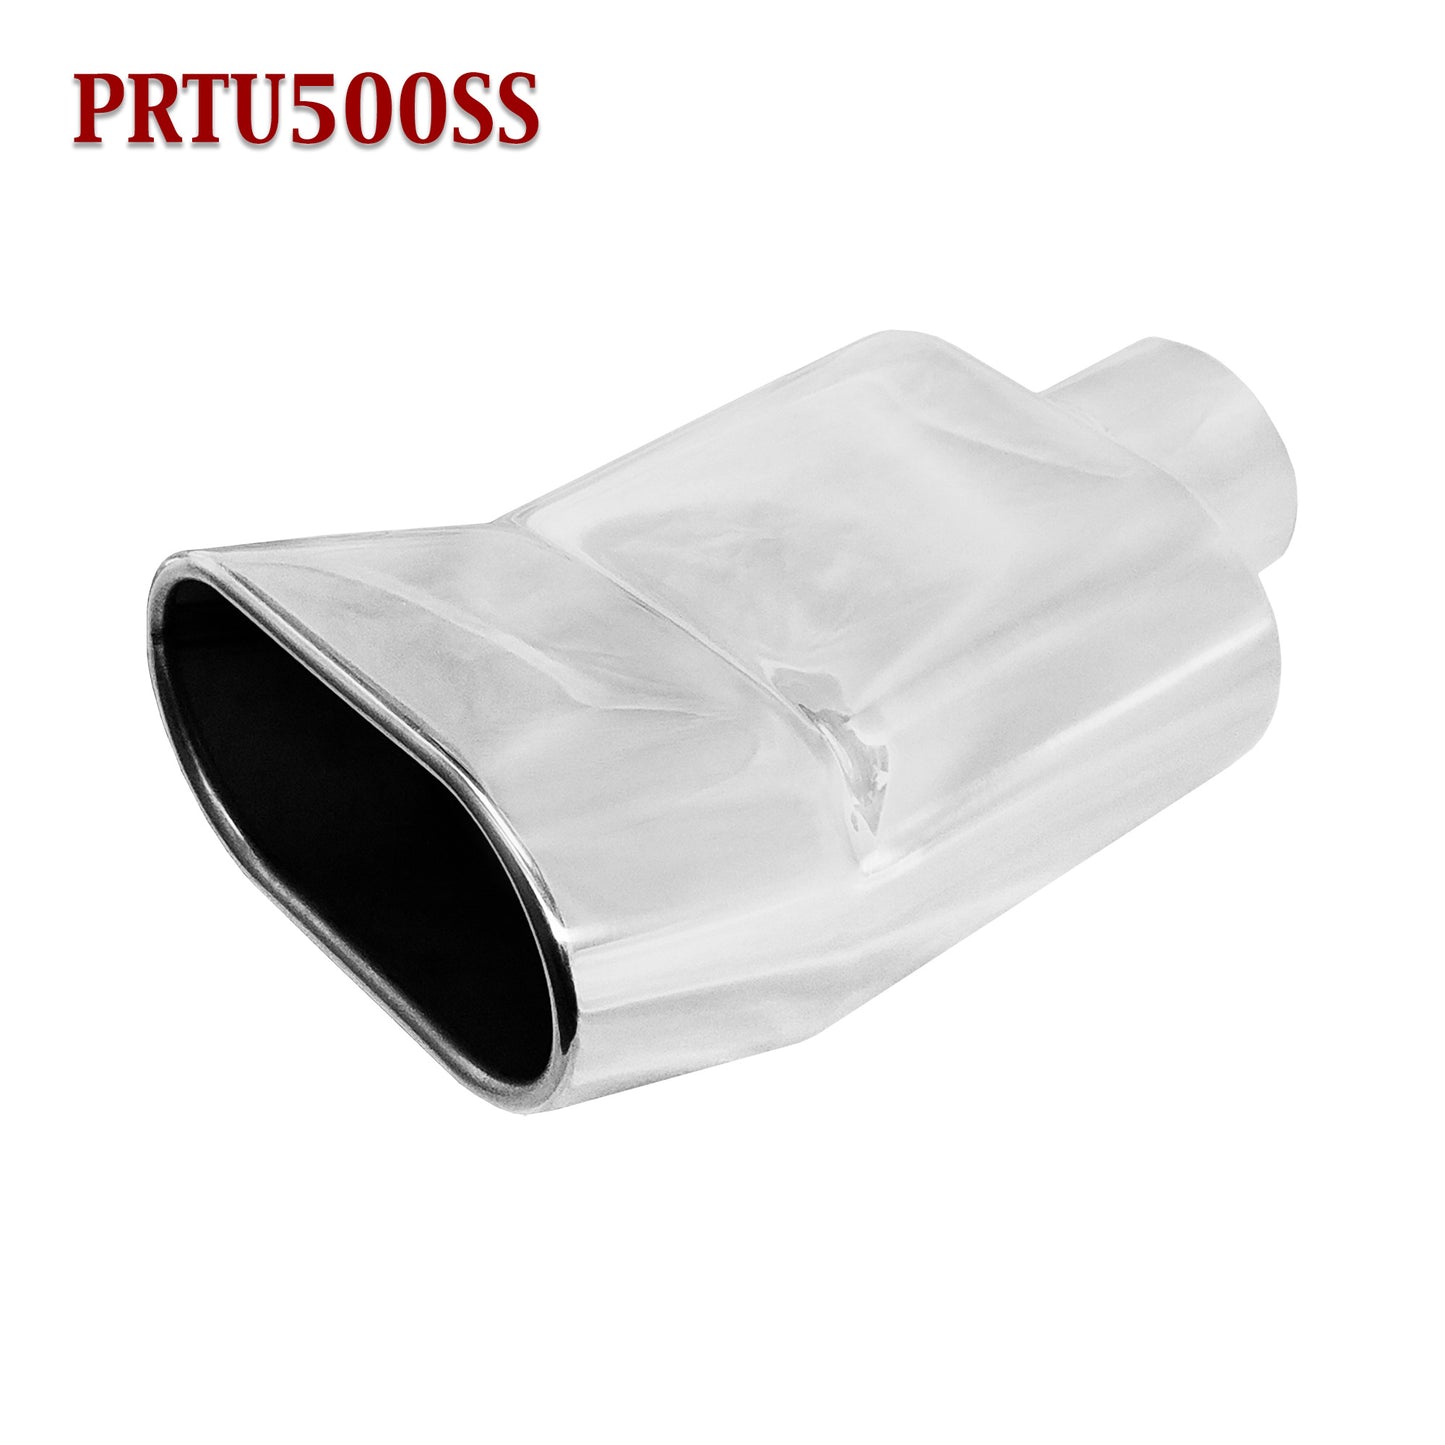 PRTU500SS 2.25" Stainless Oval Turn-Up Exhaust Tip 2 1/4" Inlet 5 1/2" x 3 1/8" Outlet